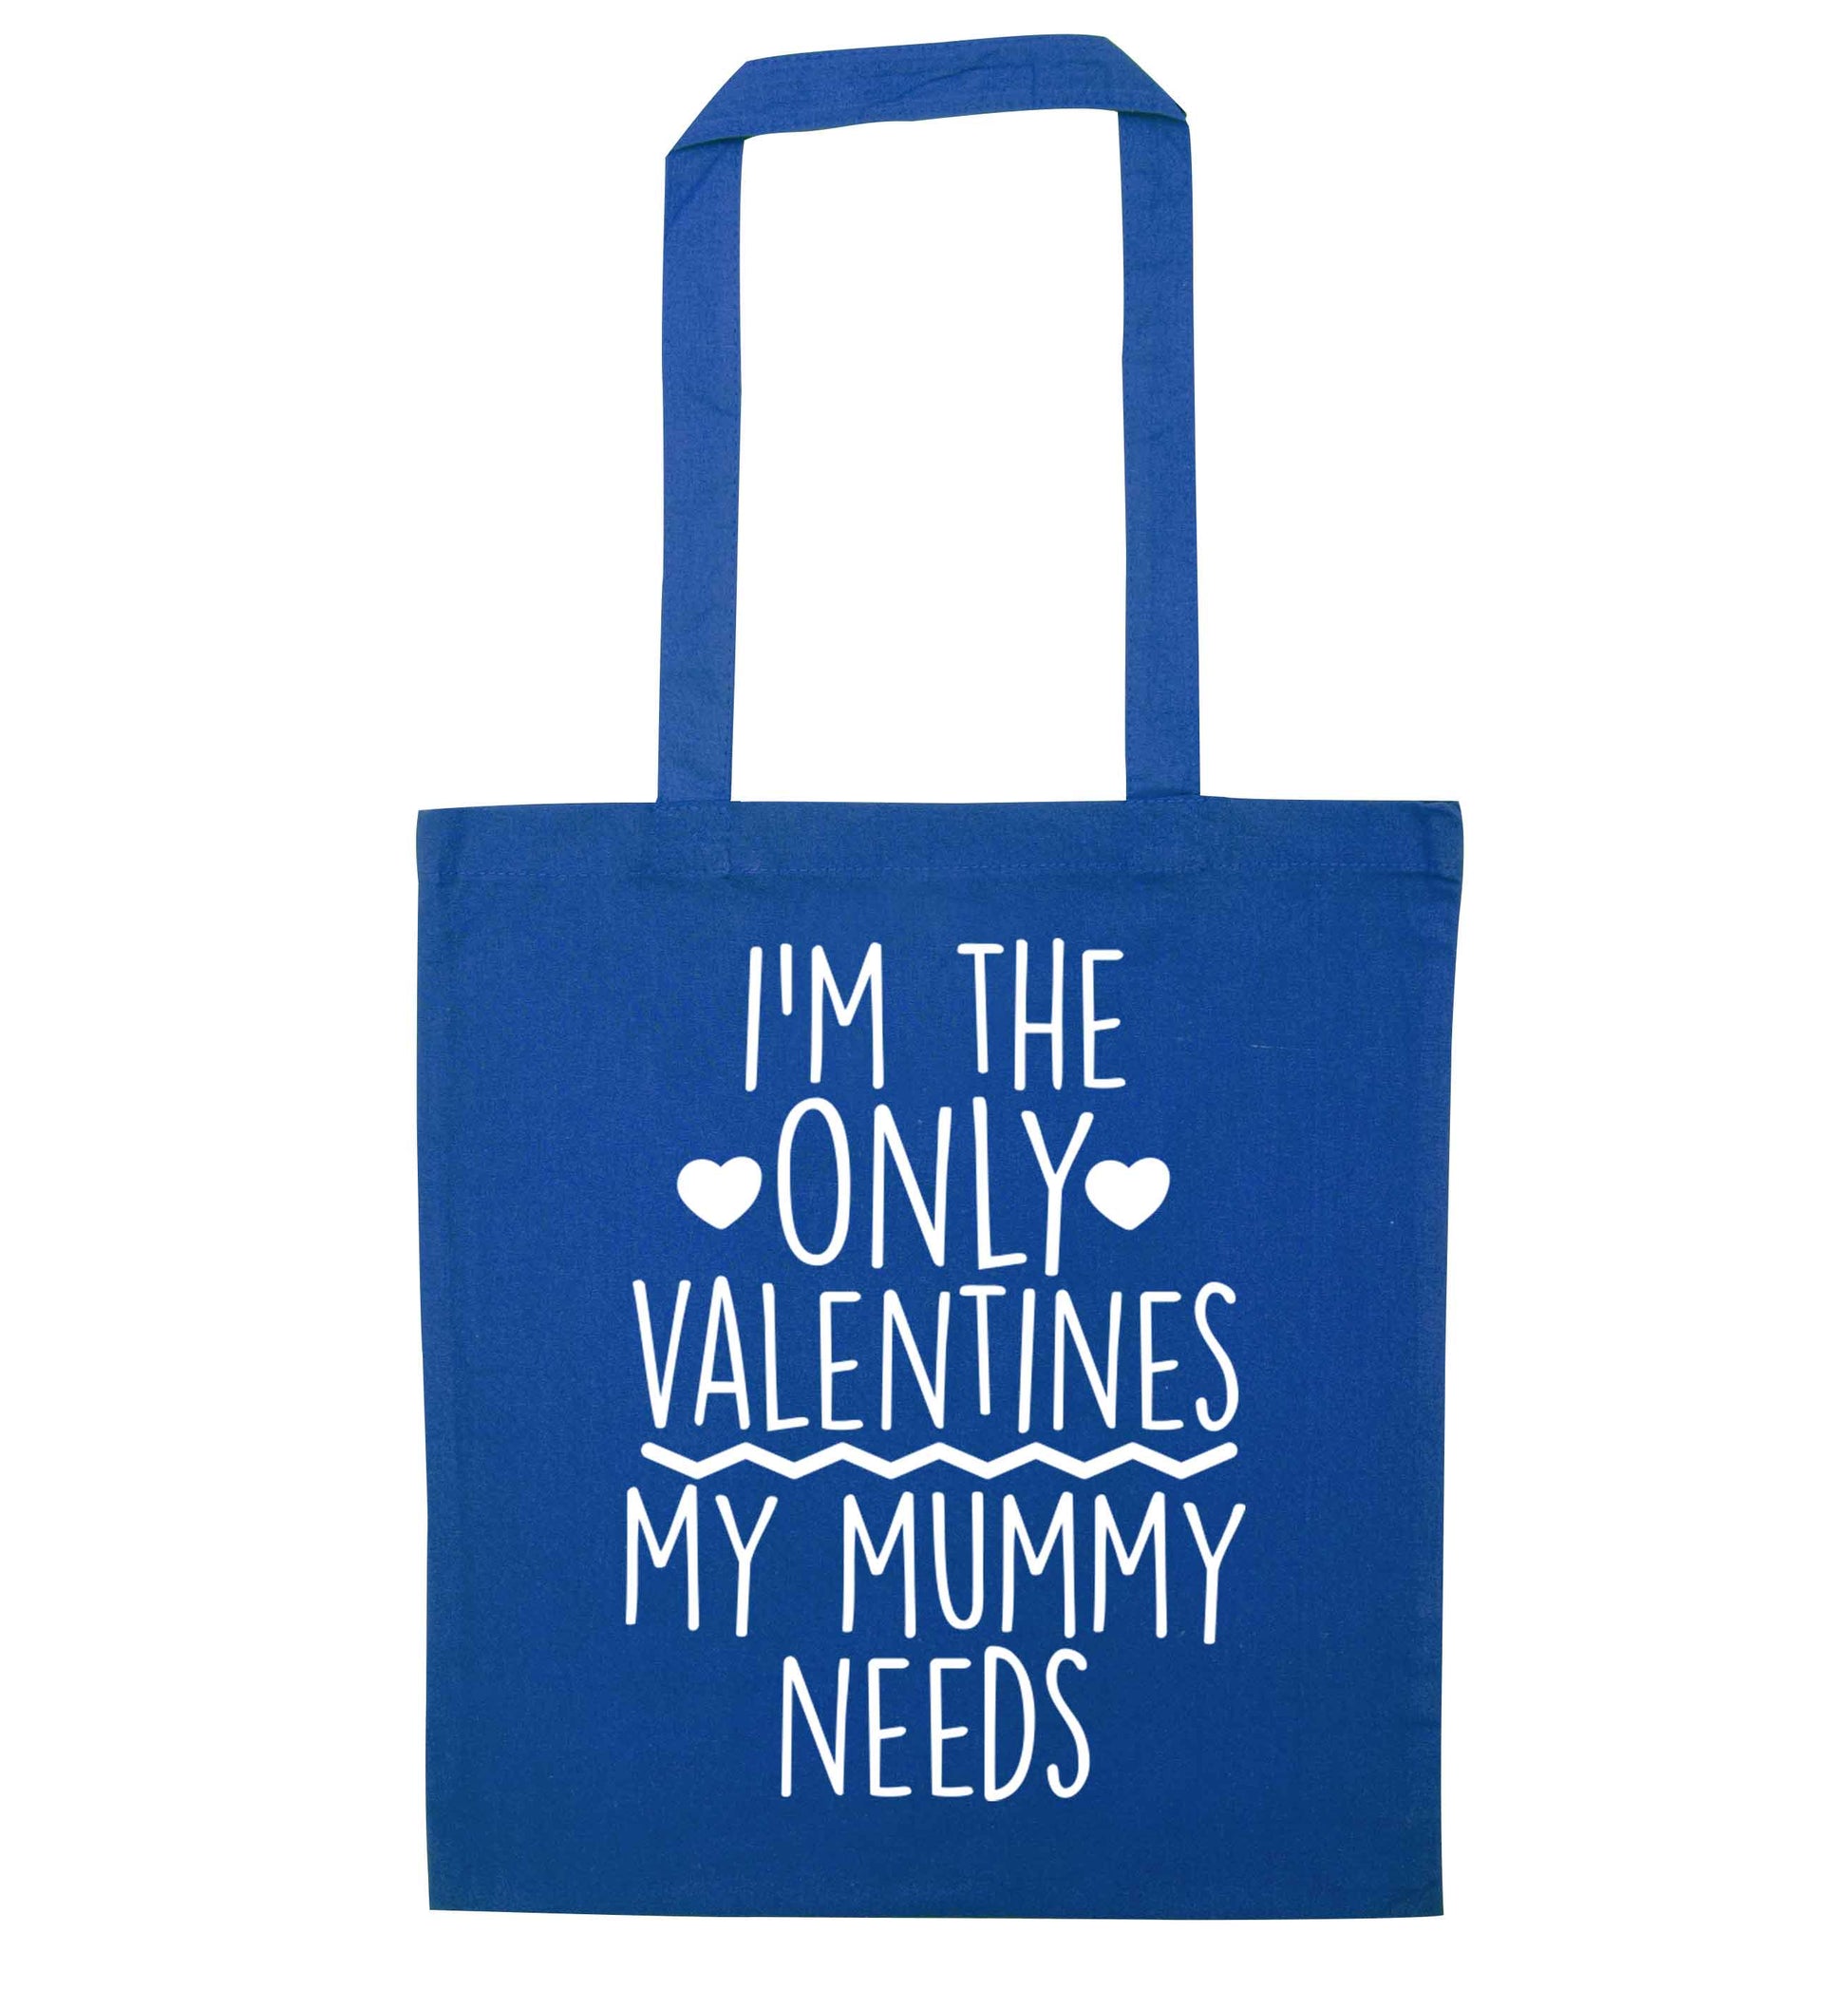 I'm the only valentines my mummy needs blue tote bag